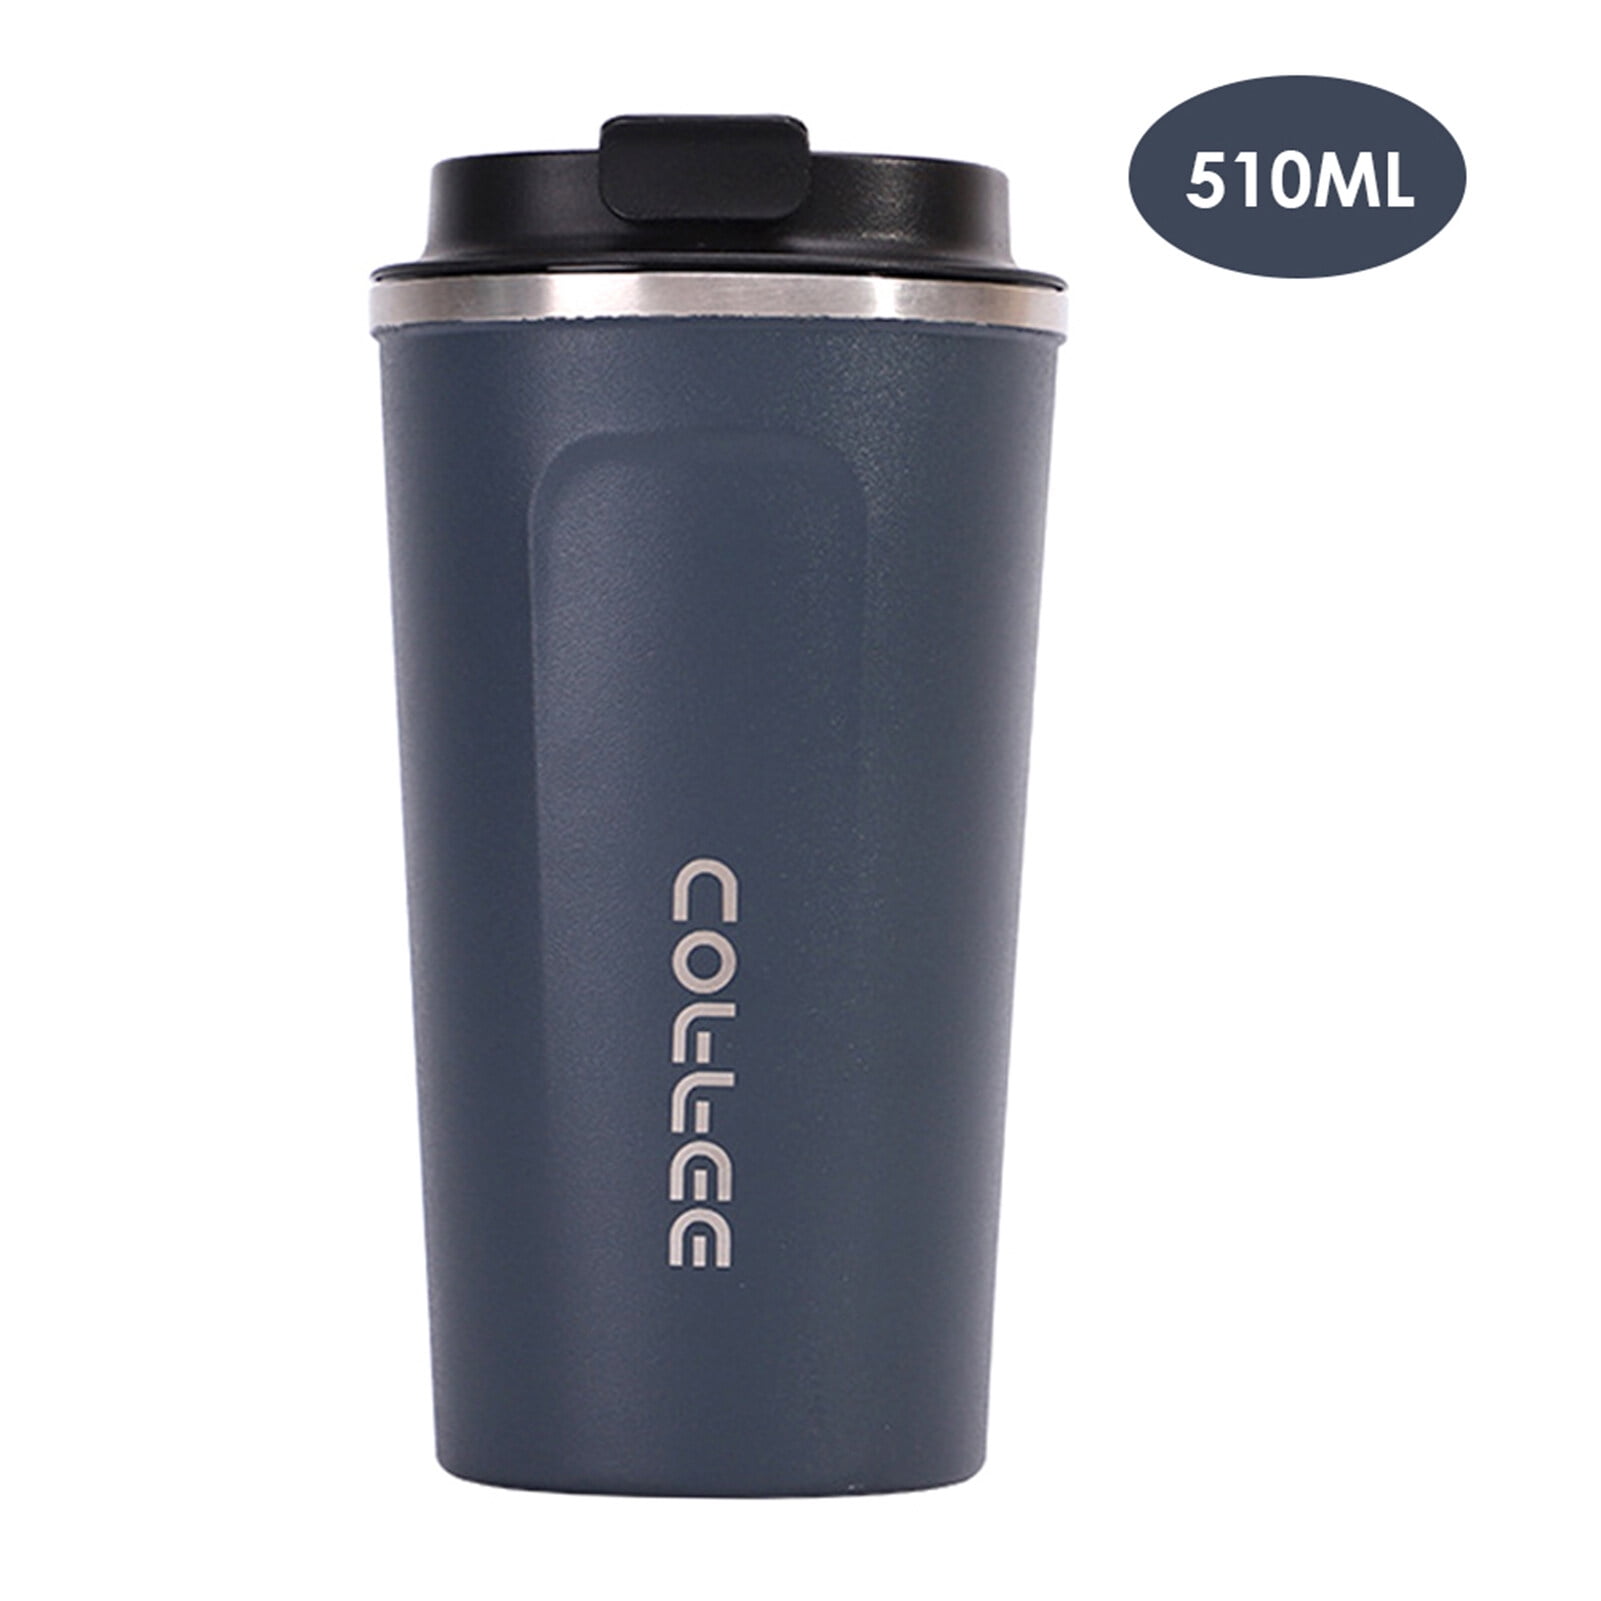 VUSIGN 510ML Stainless Steel Car Coffee Cup Leakproof Insulated